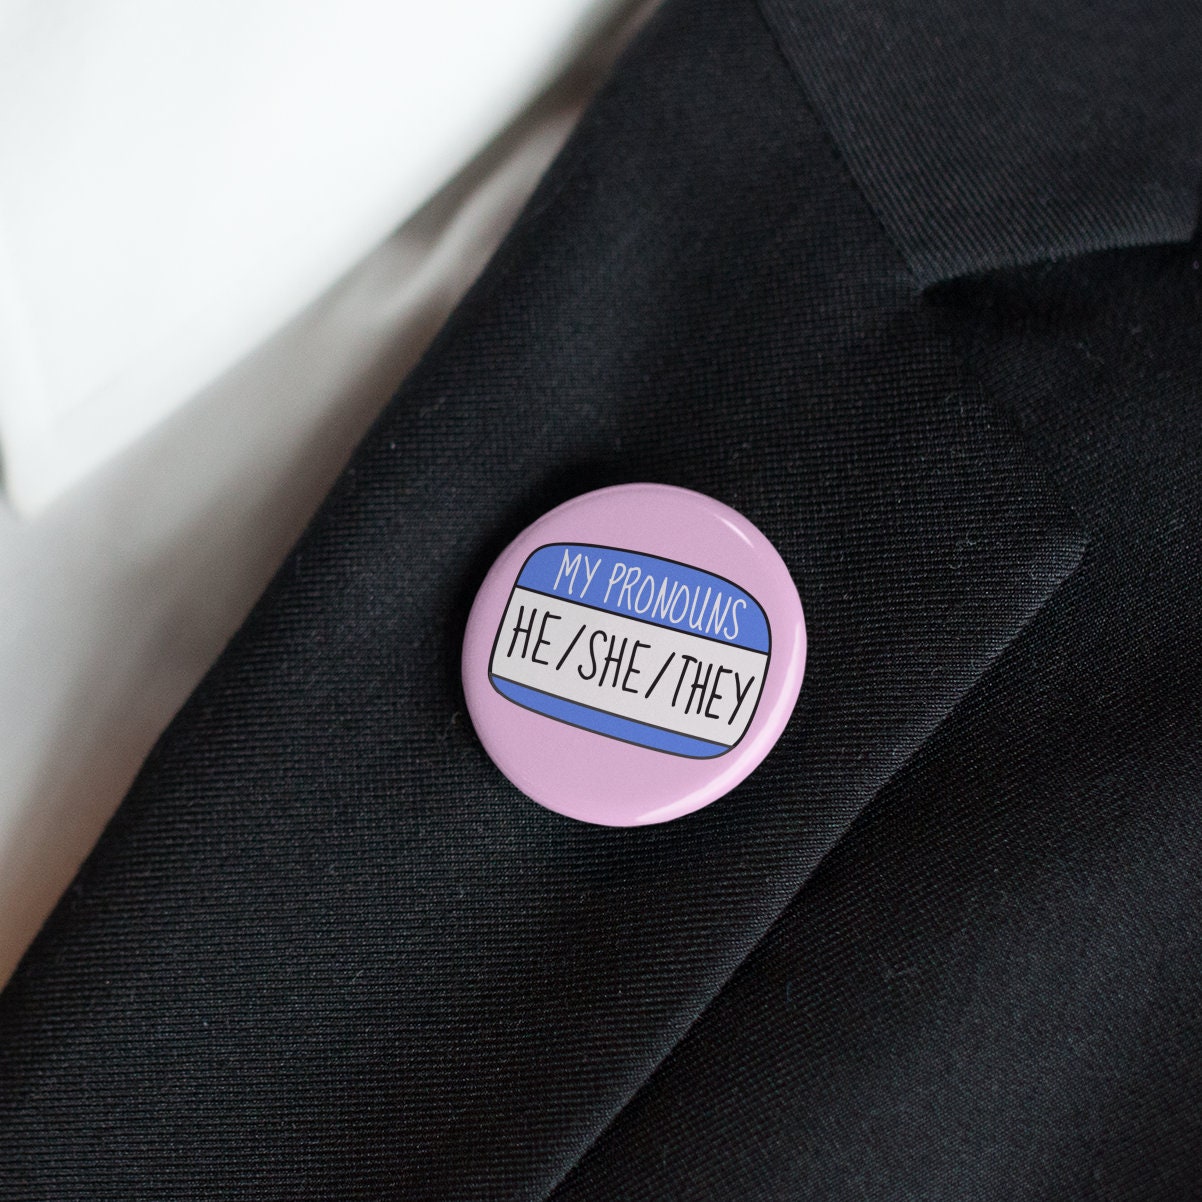 Any Pronouns Badge Pin | He She They - All Pronouns - Gender Badge